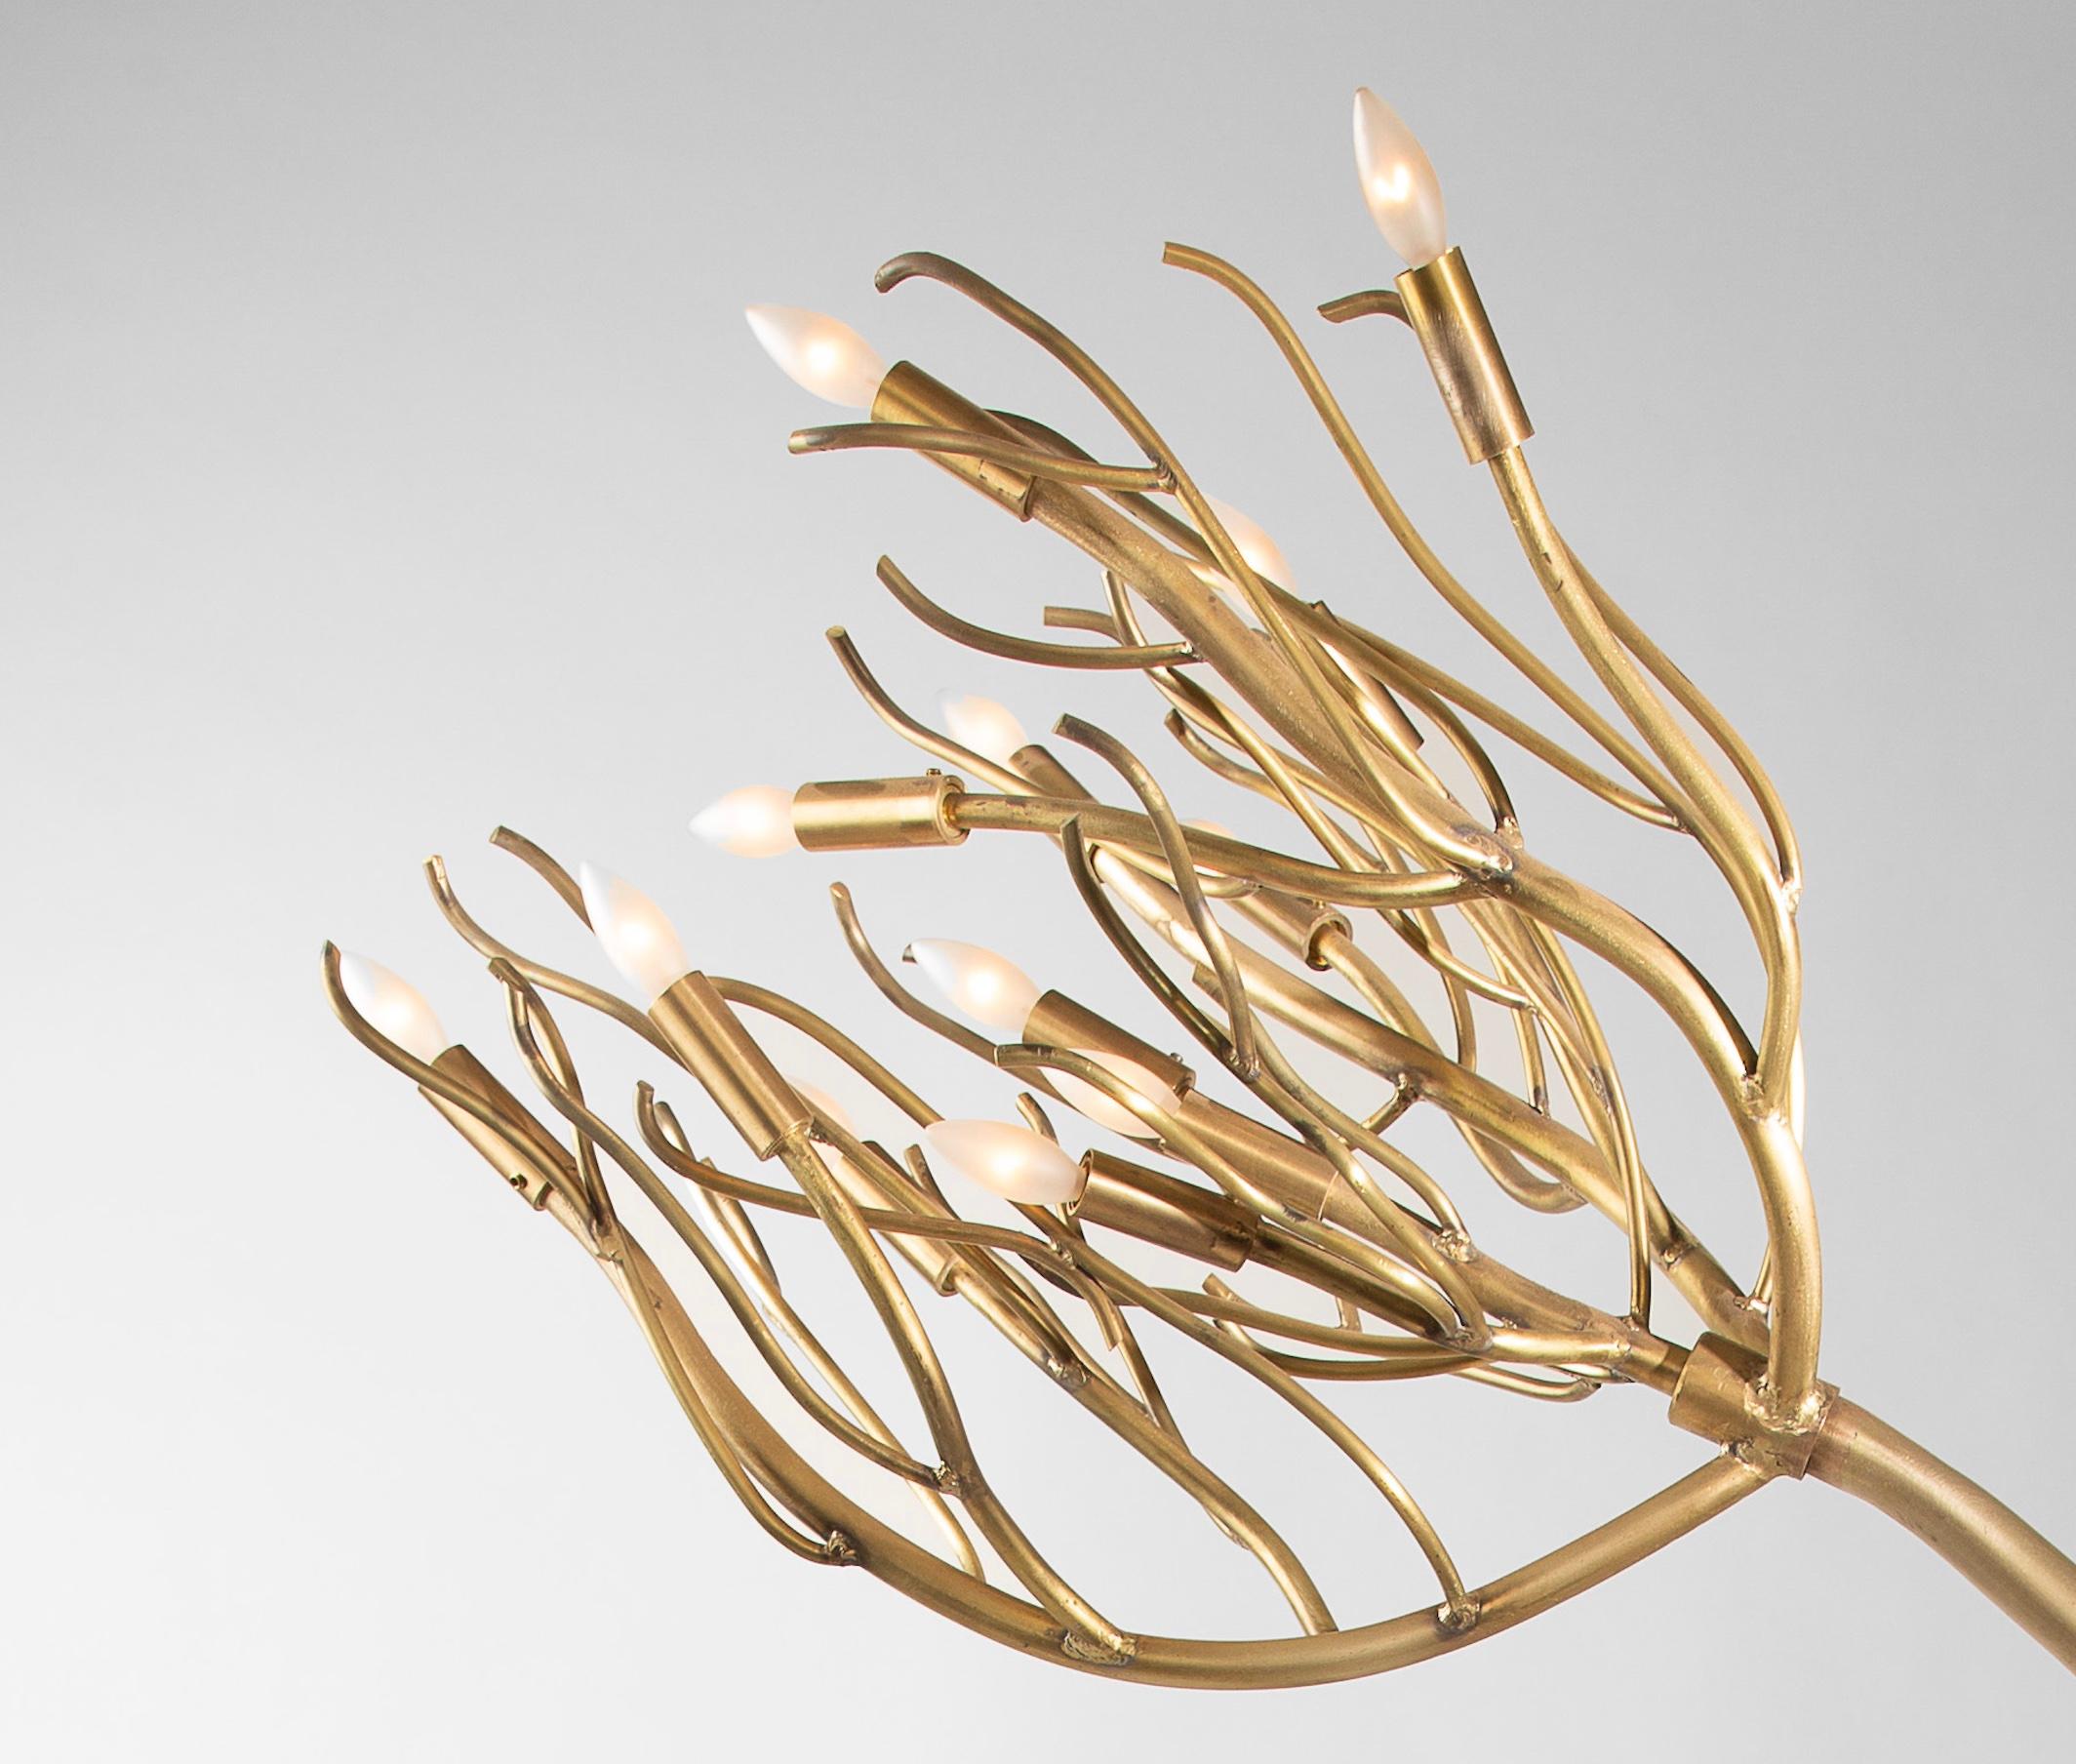 This original, organic modernist design is crafted entirely by hand and features a series of upswept branches circling a slender 